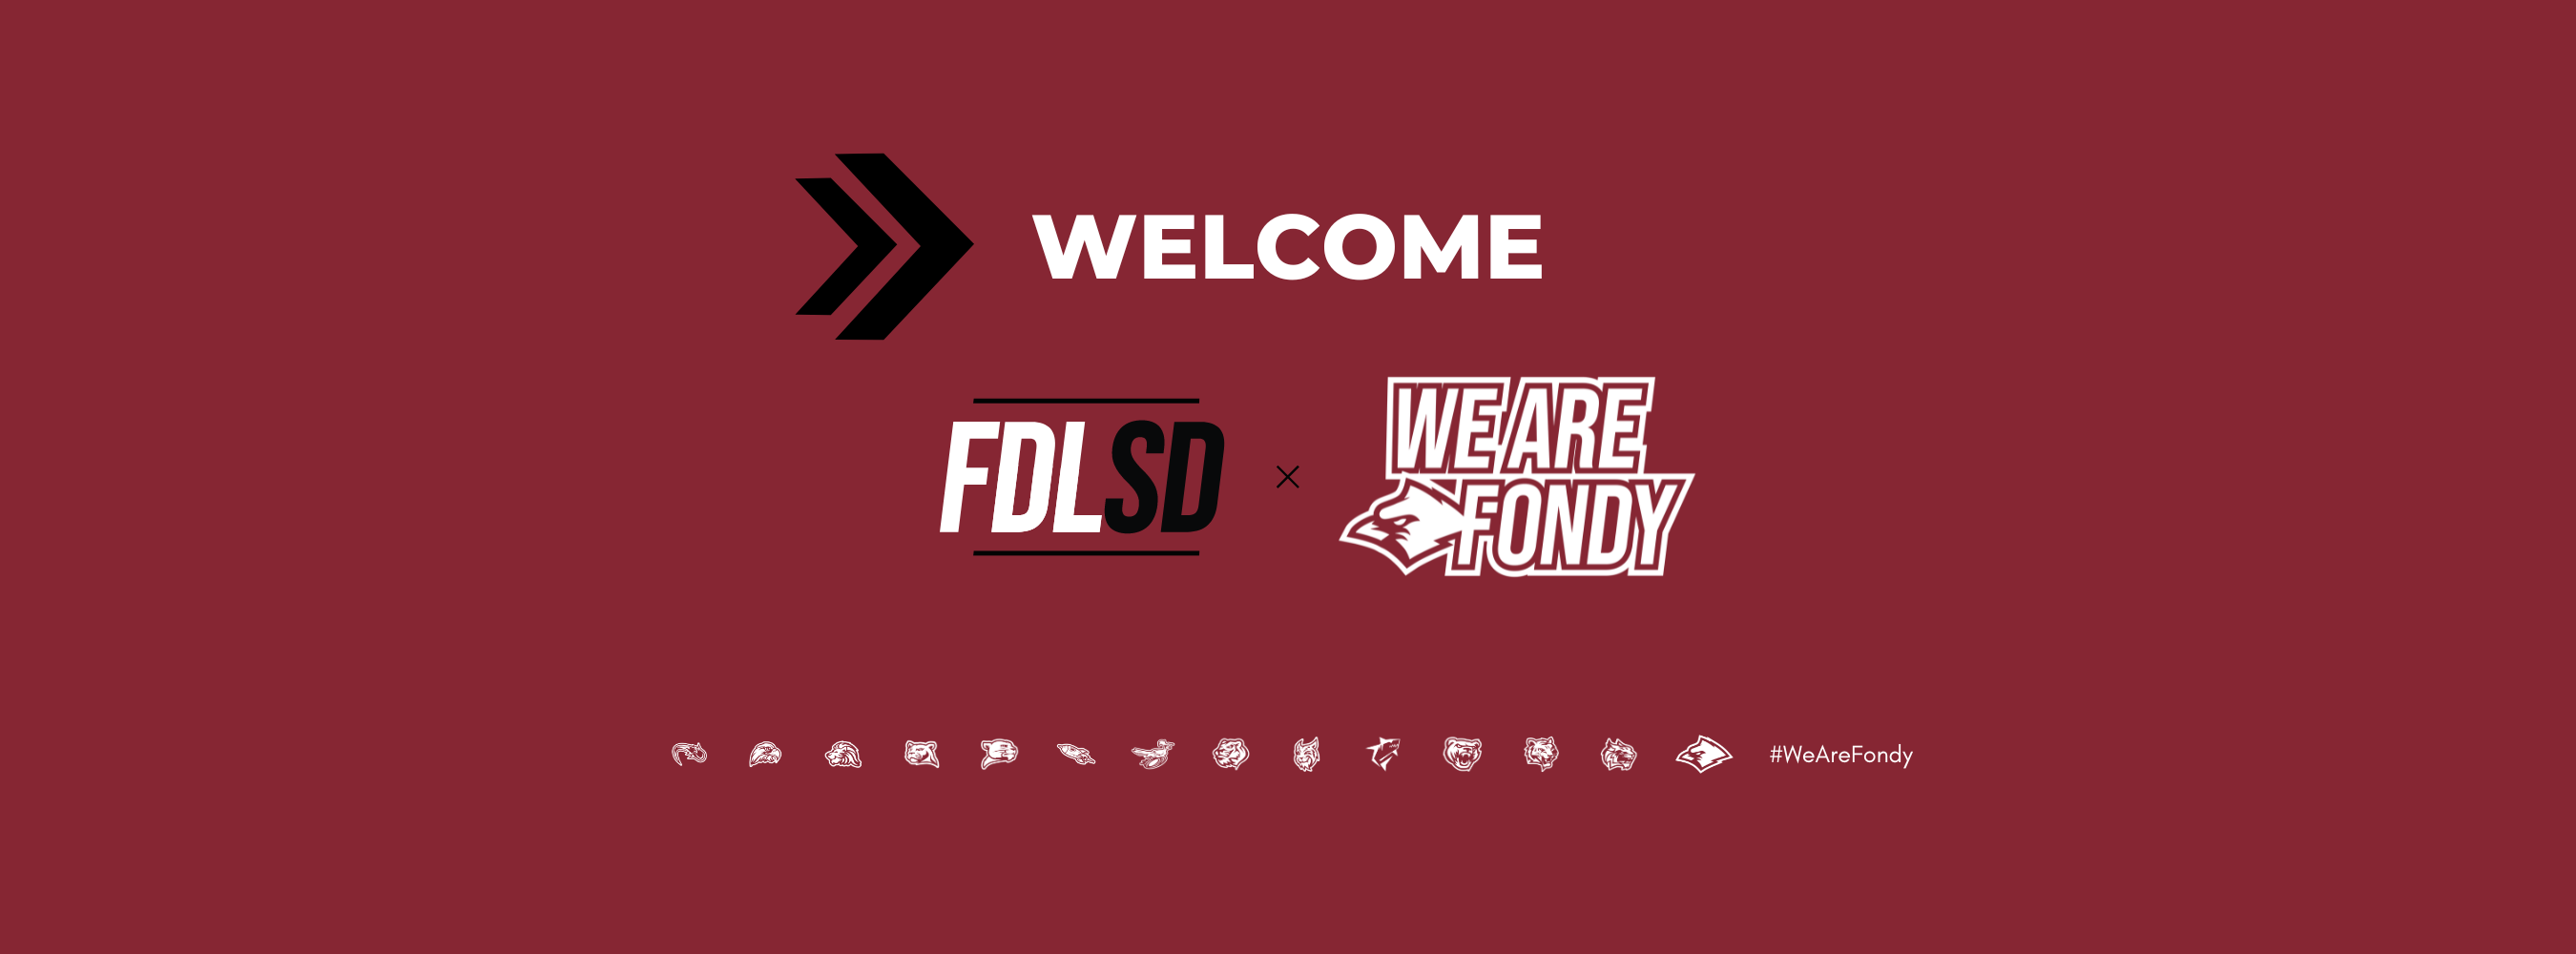 Welcome to FDLsd.org.